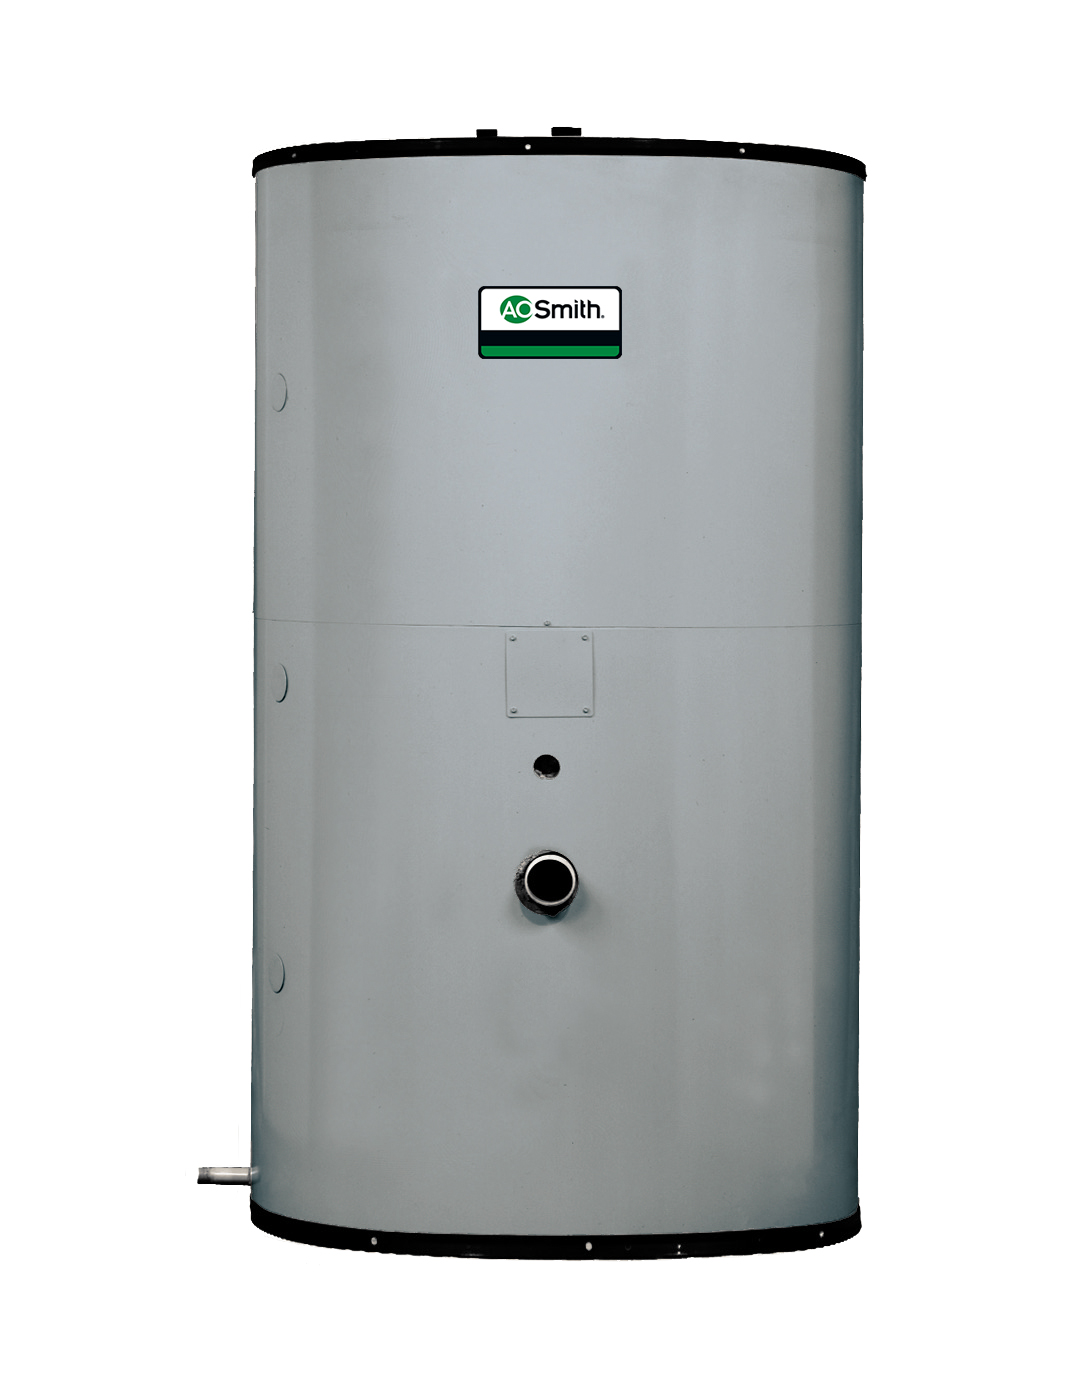 AO SMITH TJ80S: 80 GALLON, JACKETED-VERTICAL,ROUND WATER HEATER STORAGE TANK, 150 PSI